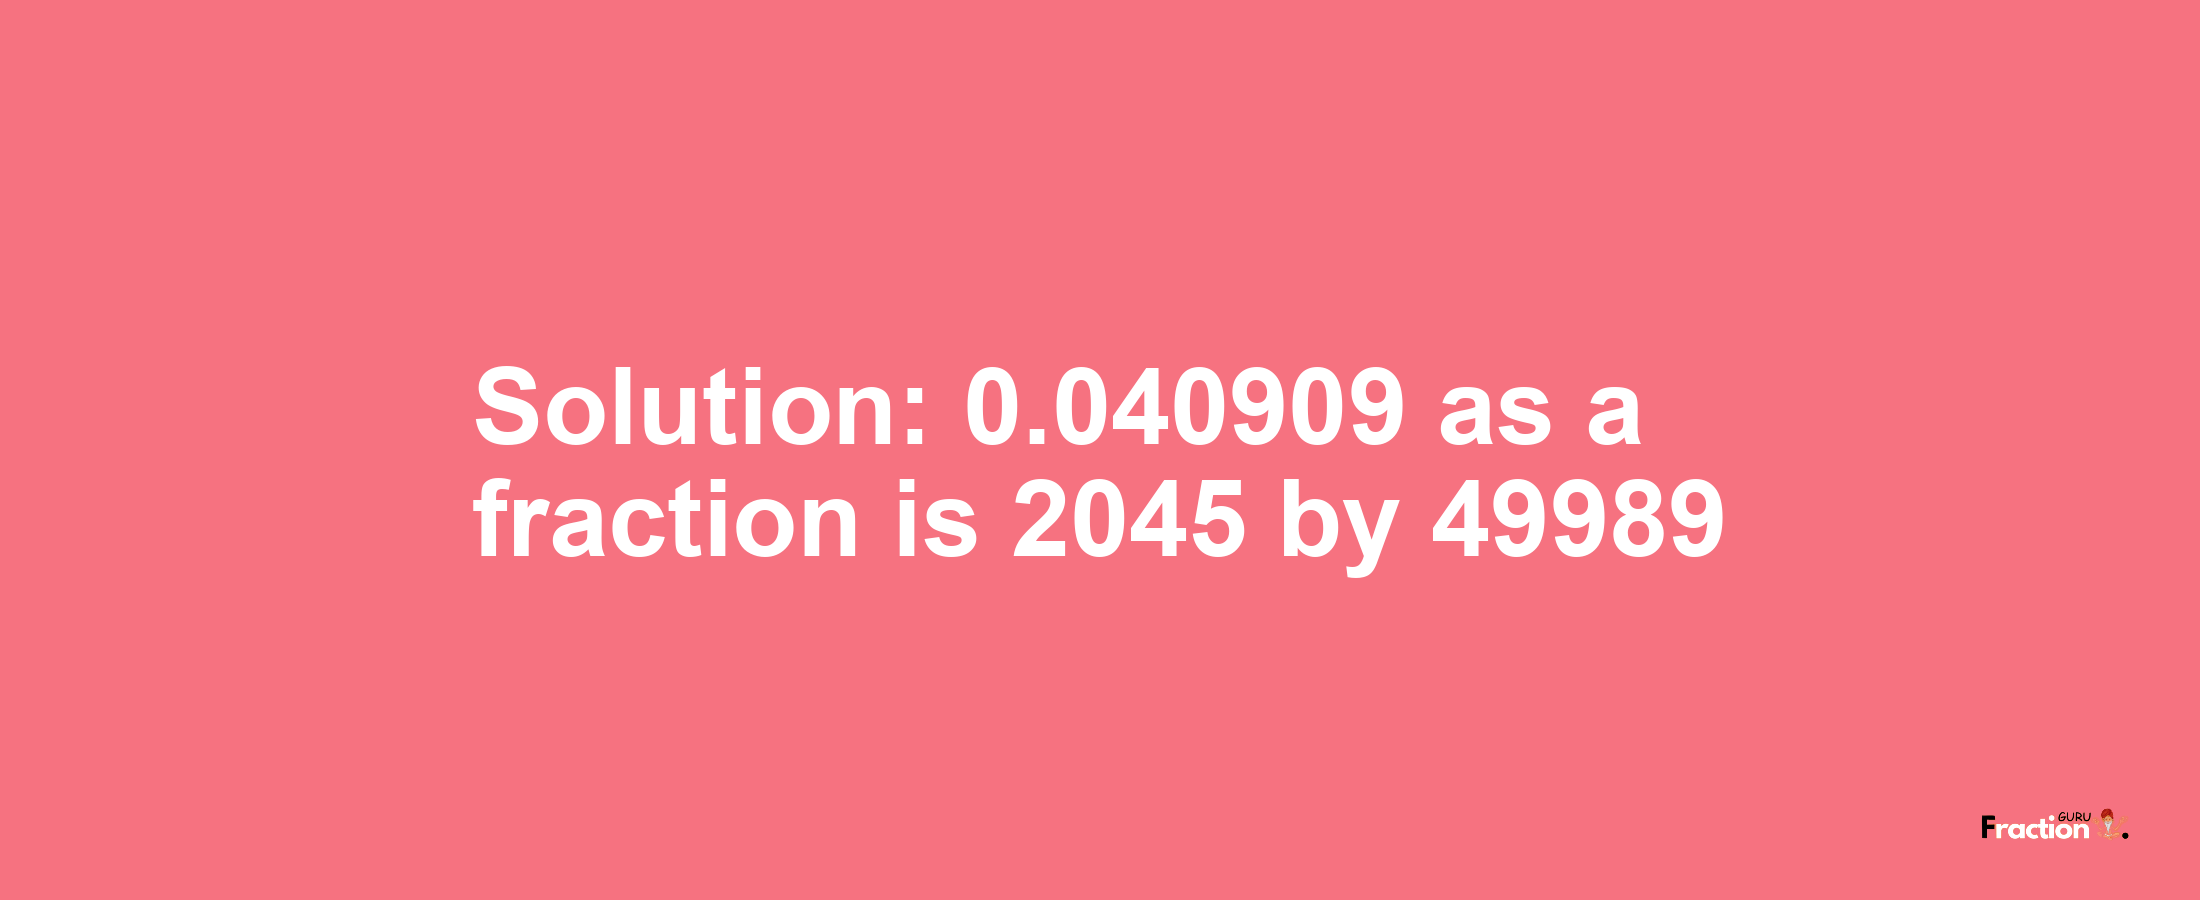 Solution:0.040909 as a fraction is 2045/49989